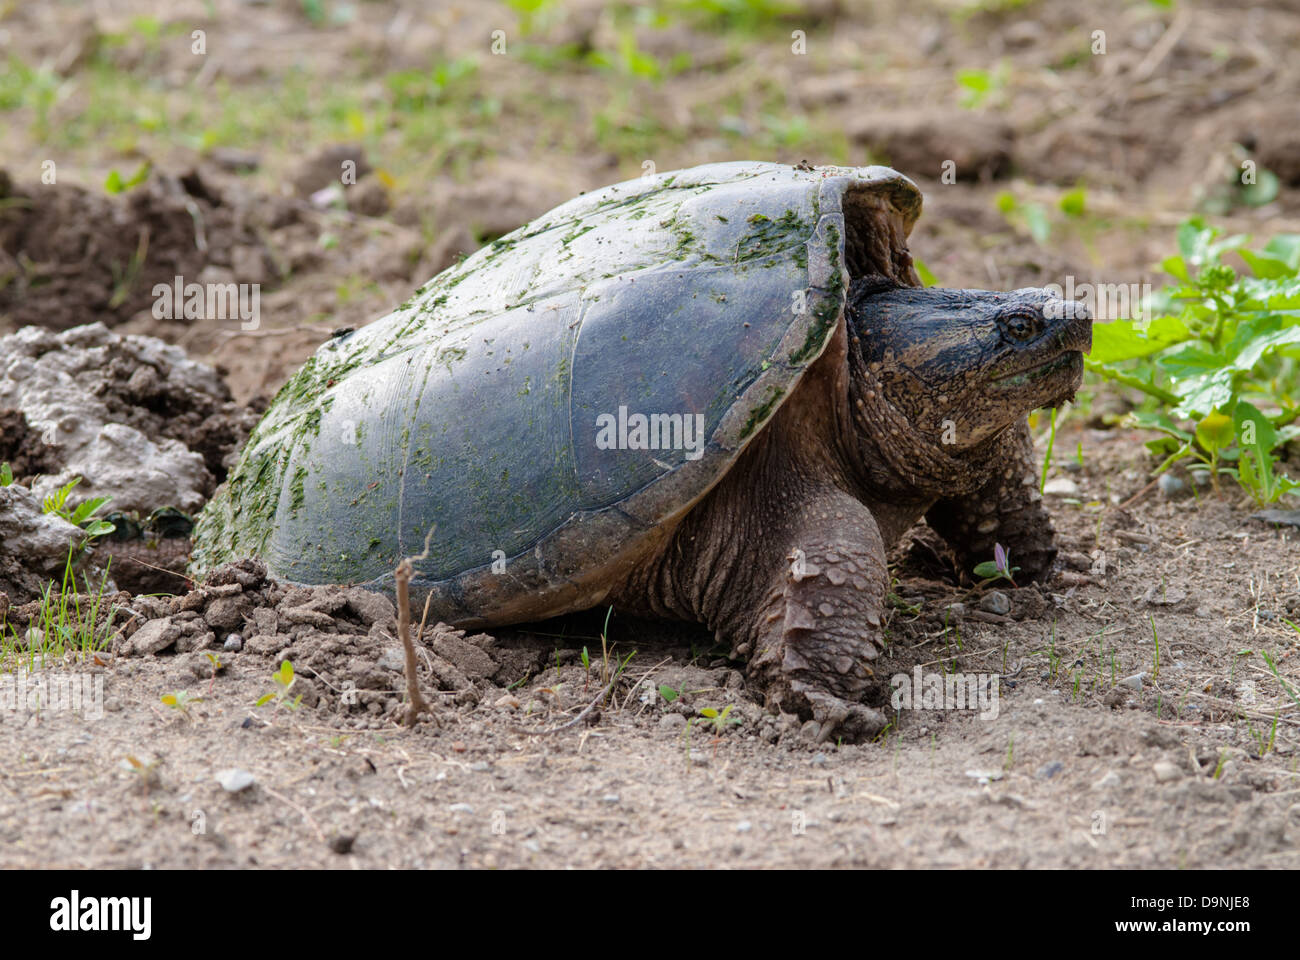 A common snapping turtle (Chelydra serpentina) laying eggs in sandy ground, Little Cataraqui Conservation Area, Ontario Stock Photo